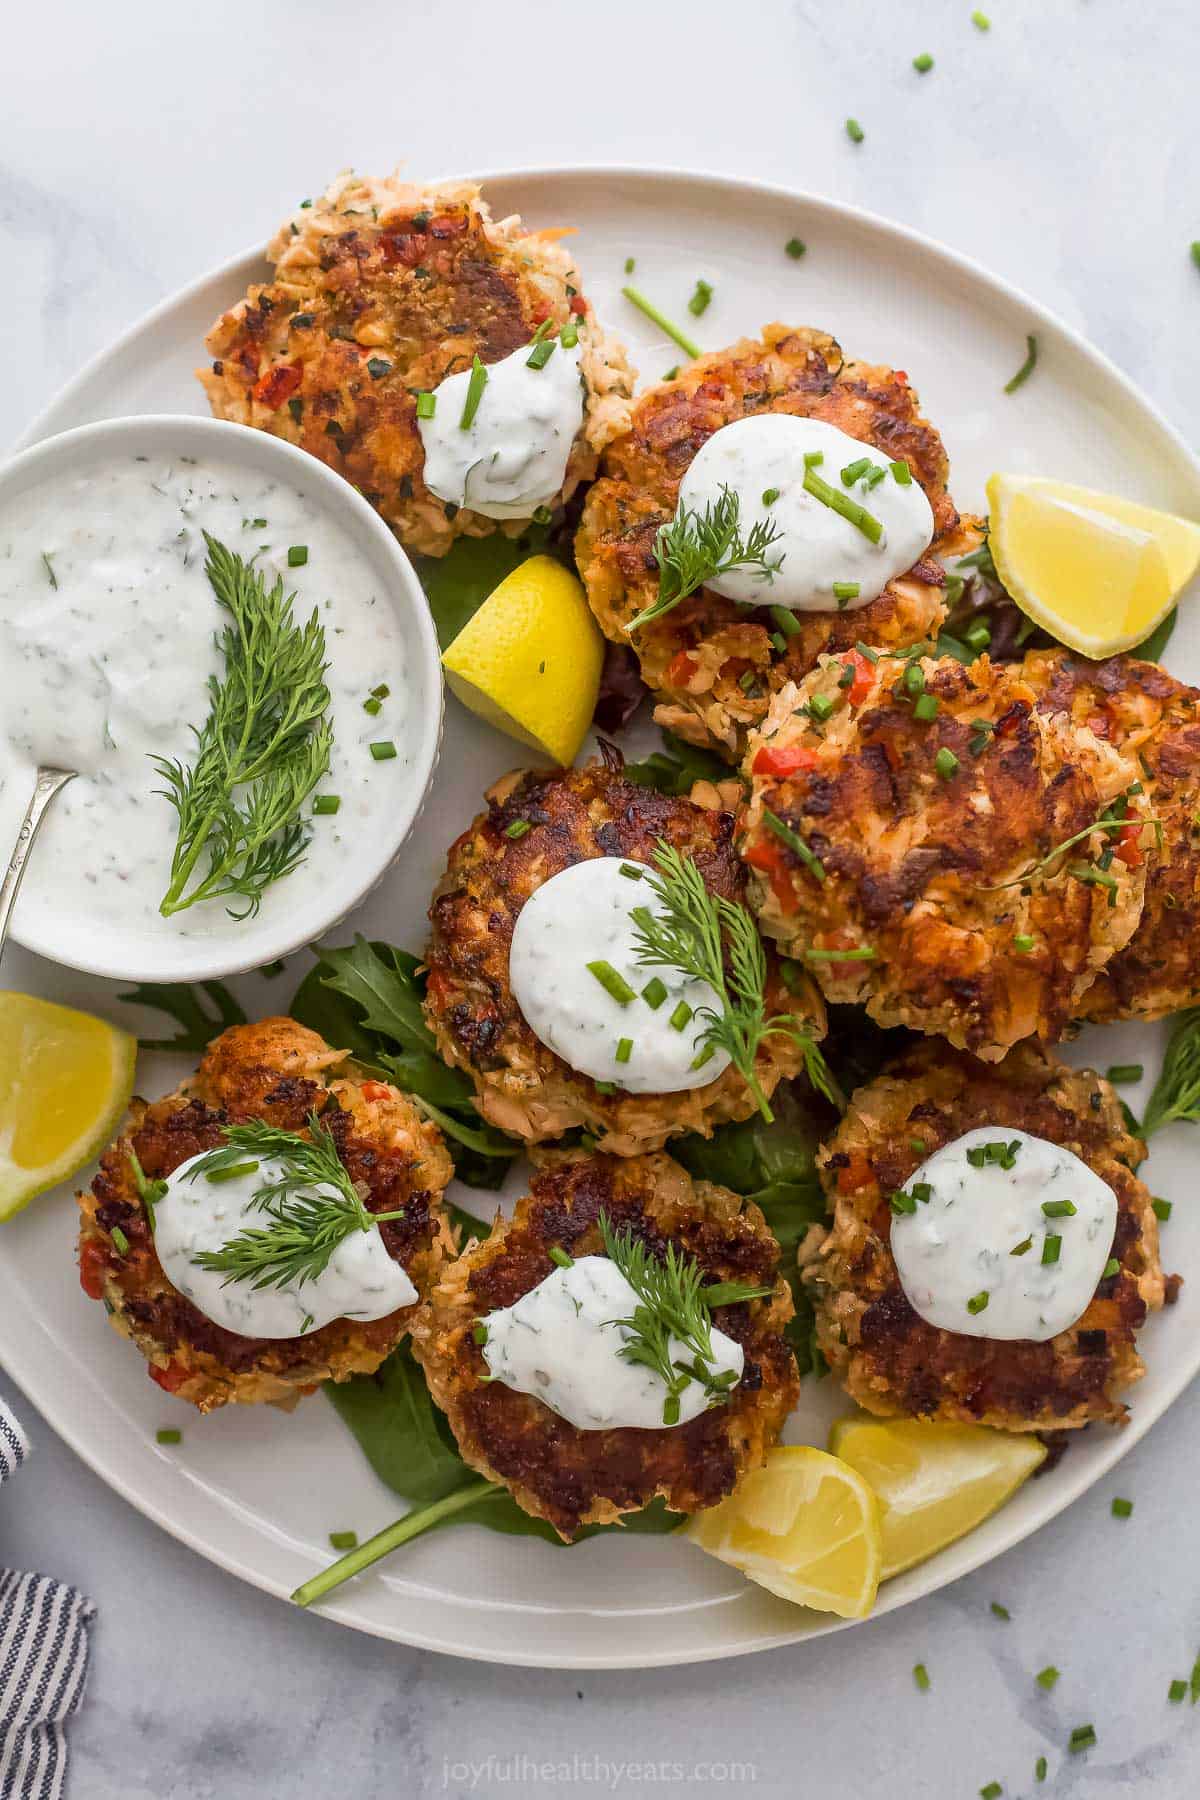 Salmon cakes with lemon dill sauce on the side. 